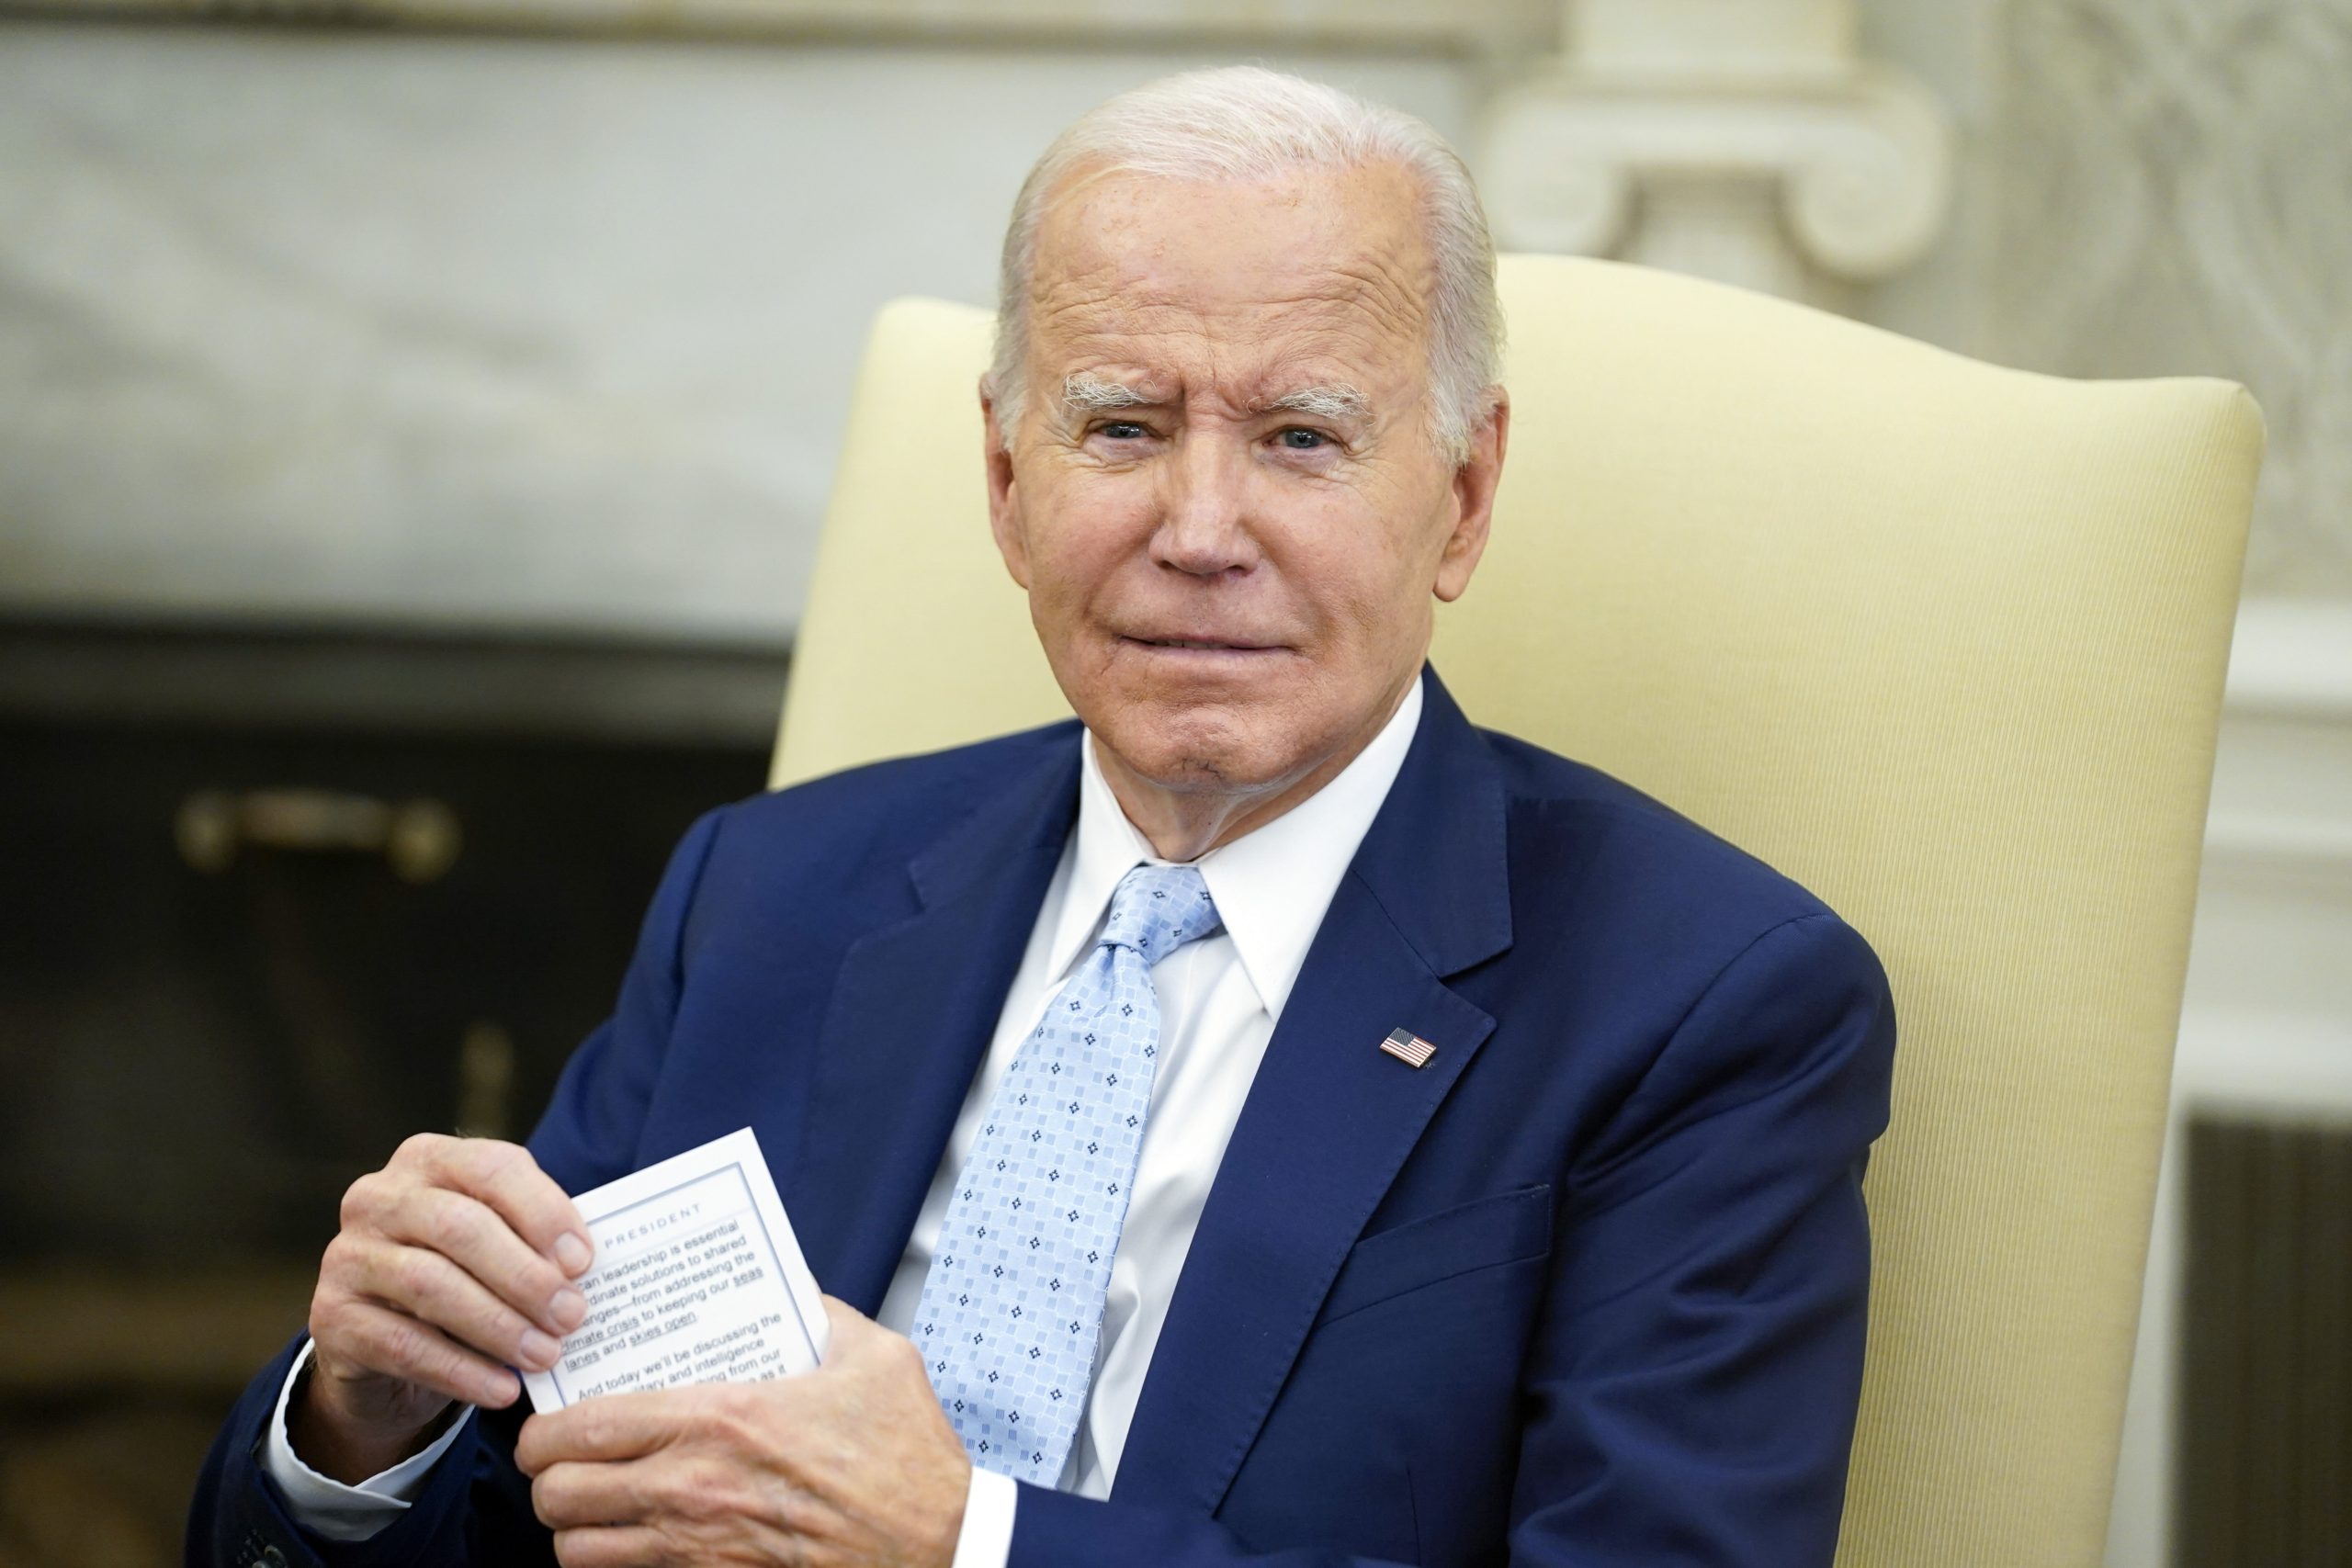 The details of Biden's plan to cancel student loans are still up for debate